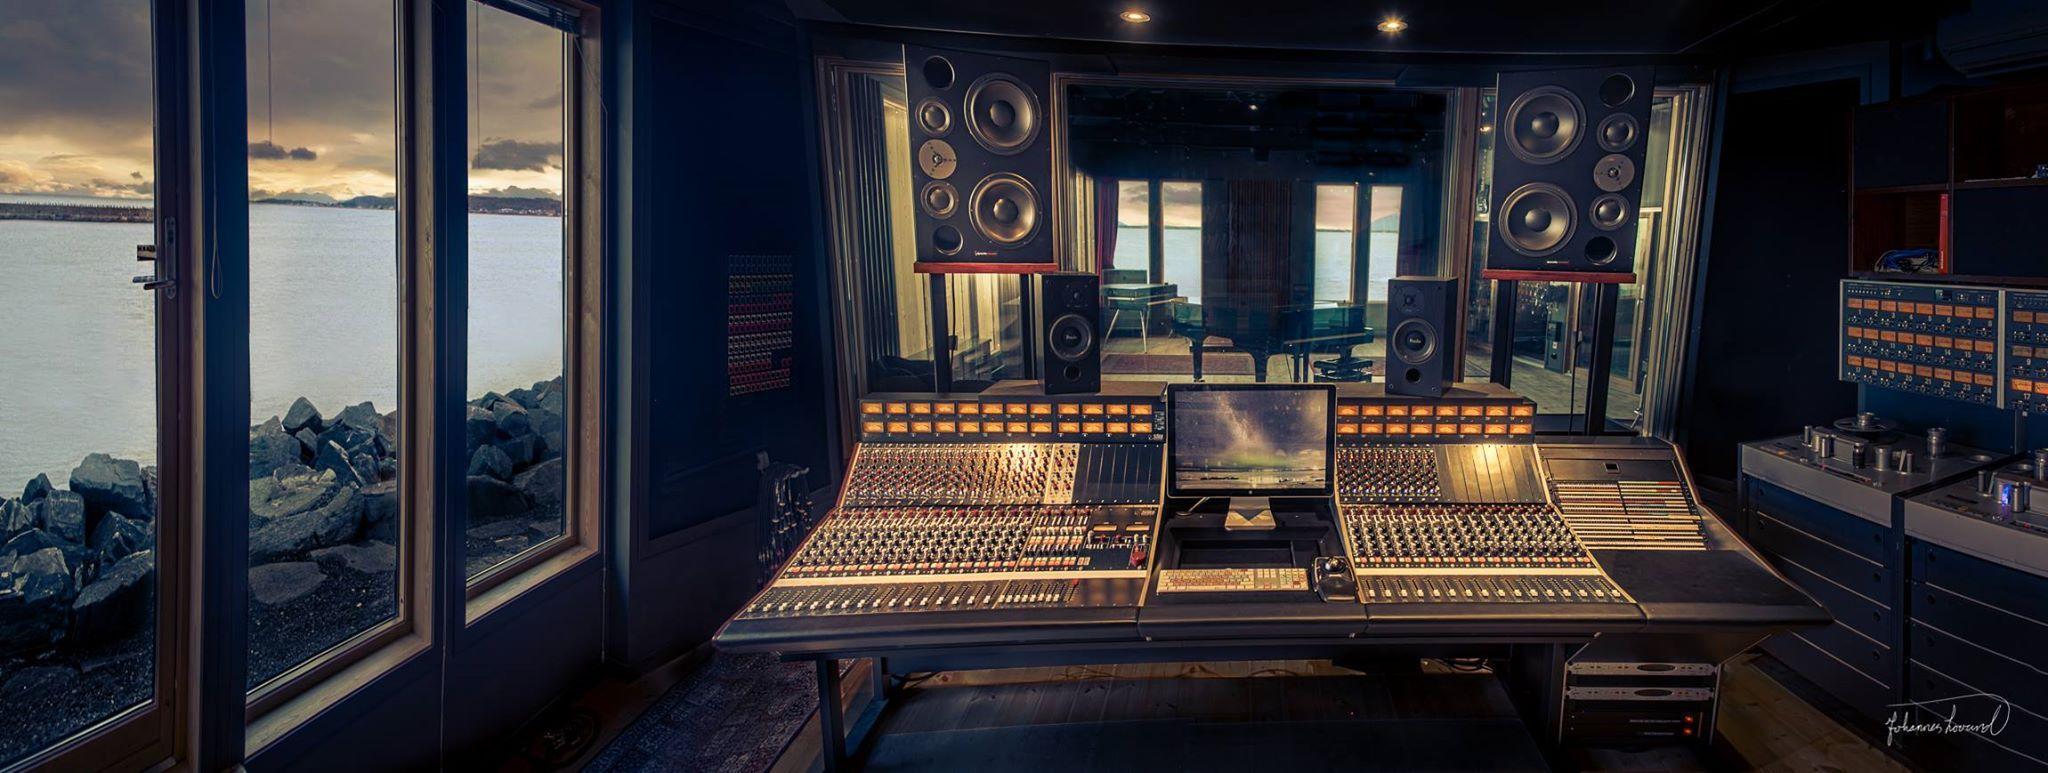 Striking a chord: recording studios that sync design and function